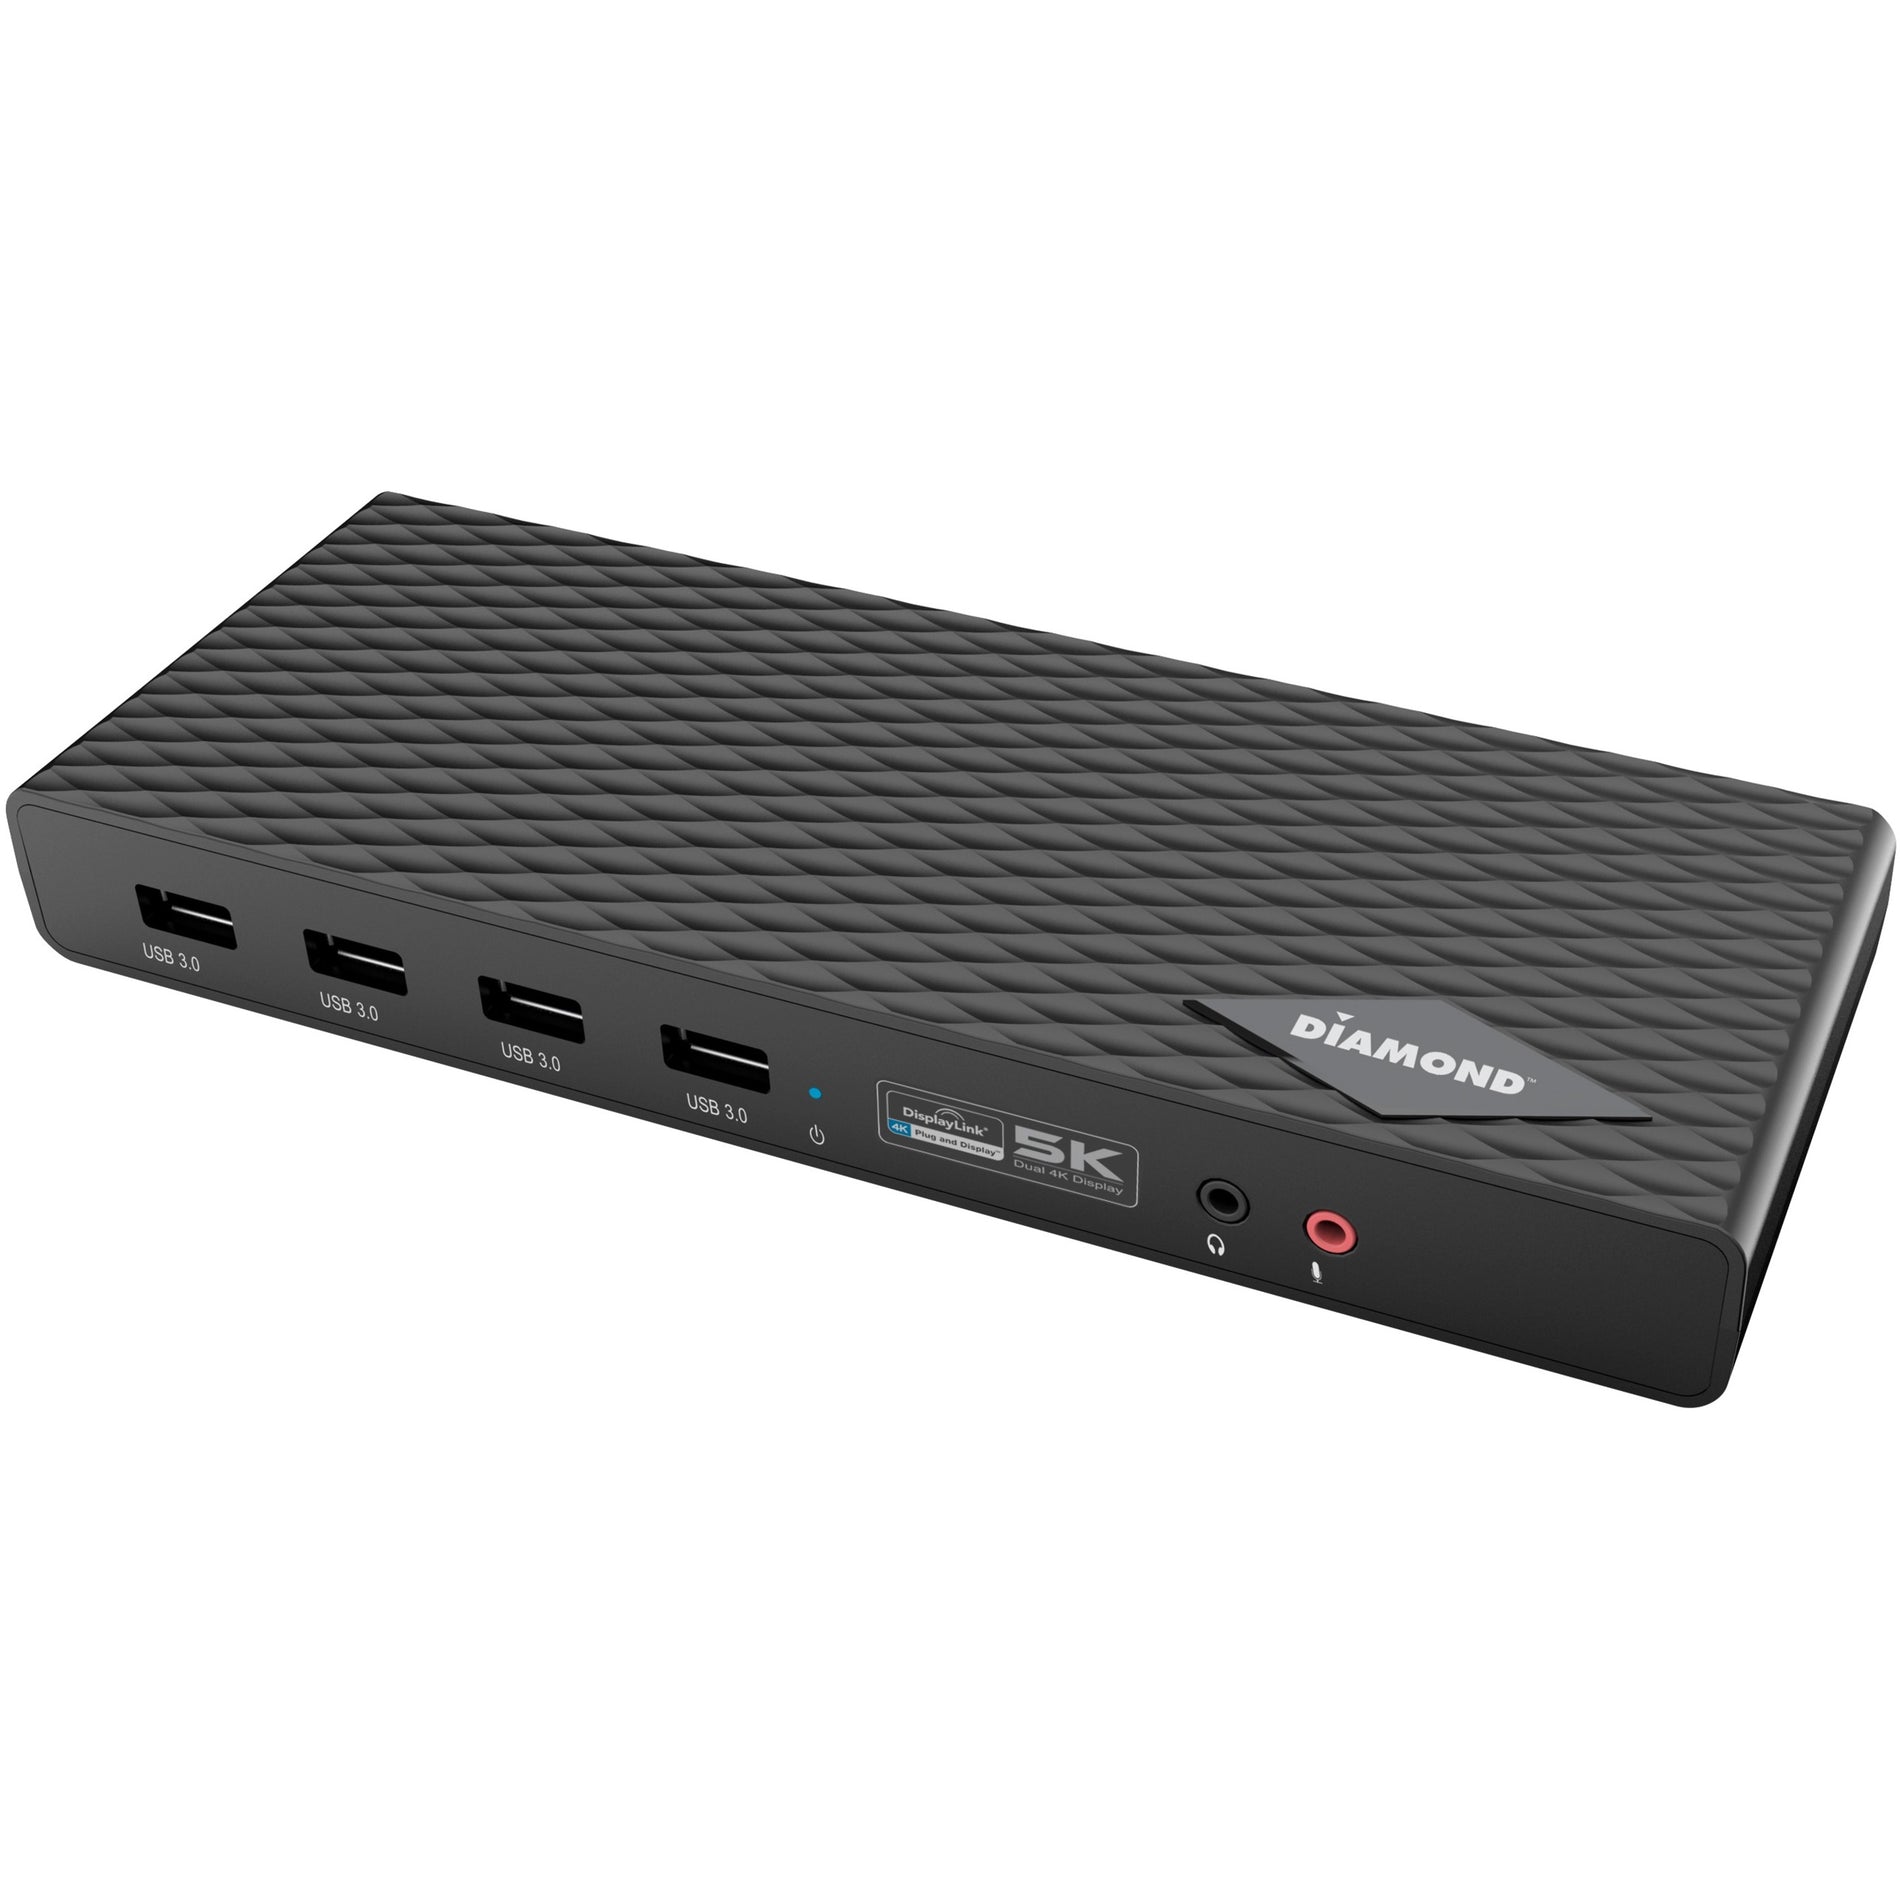 DIAMOND DS6950 Ultra Dock Docking Station, 4K/5K, Type-C and Type-A Compatibility